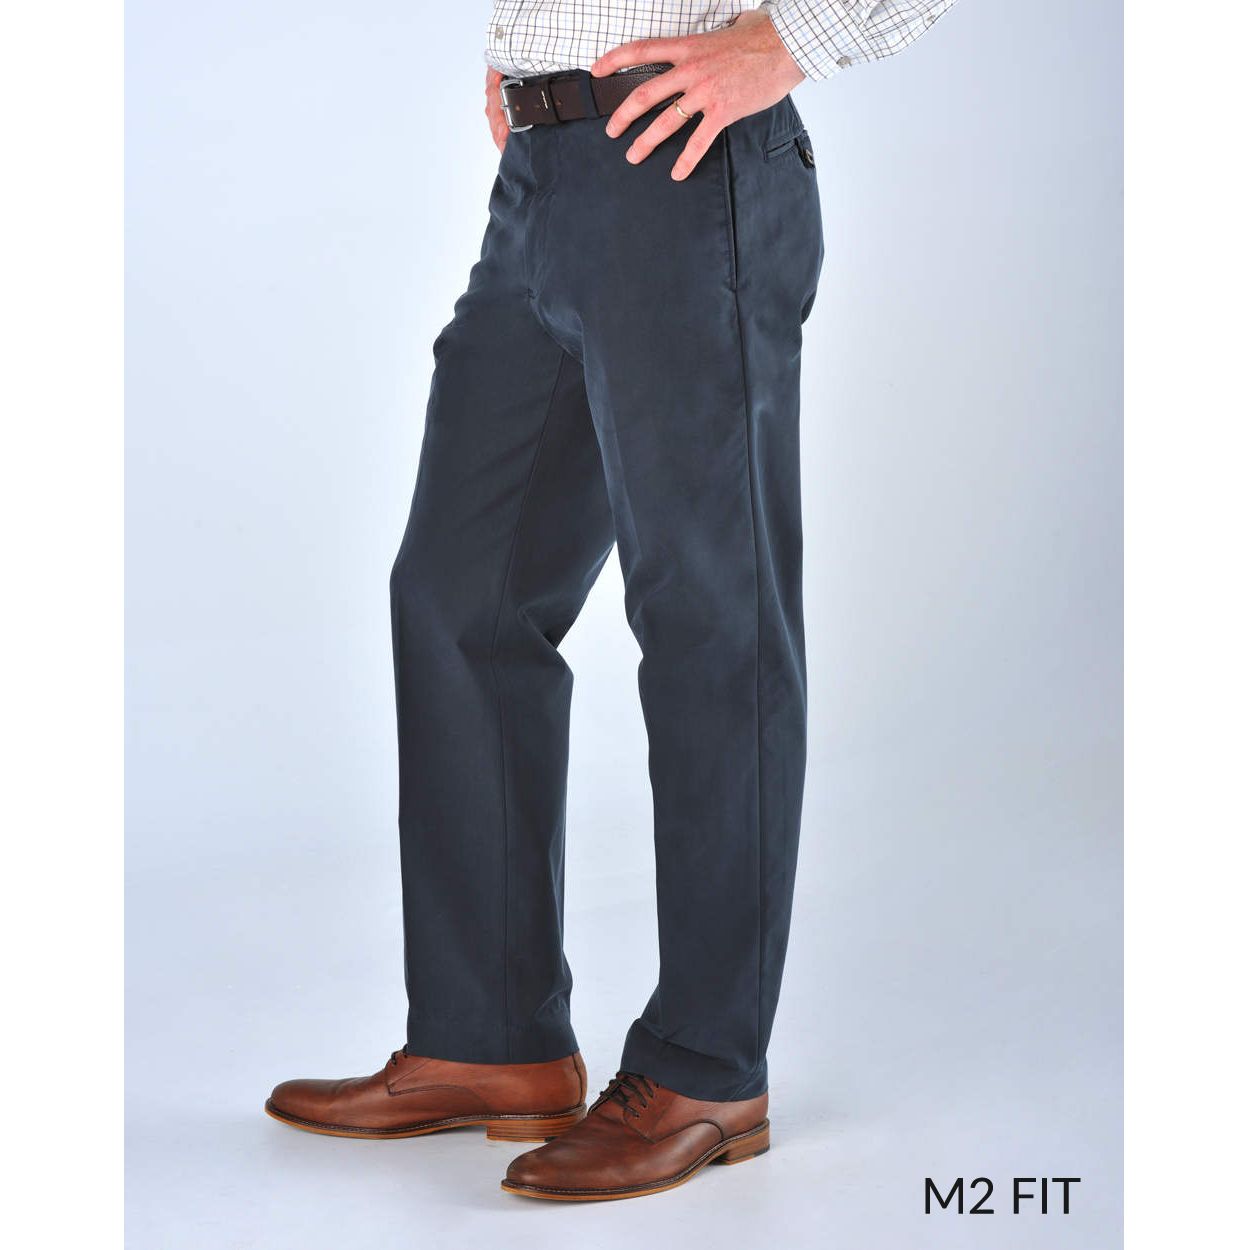 M2 Classic Fit Travel Twills in Navy (Size 44 x 30) by Bills Khakis